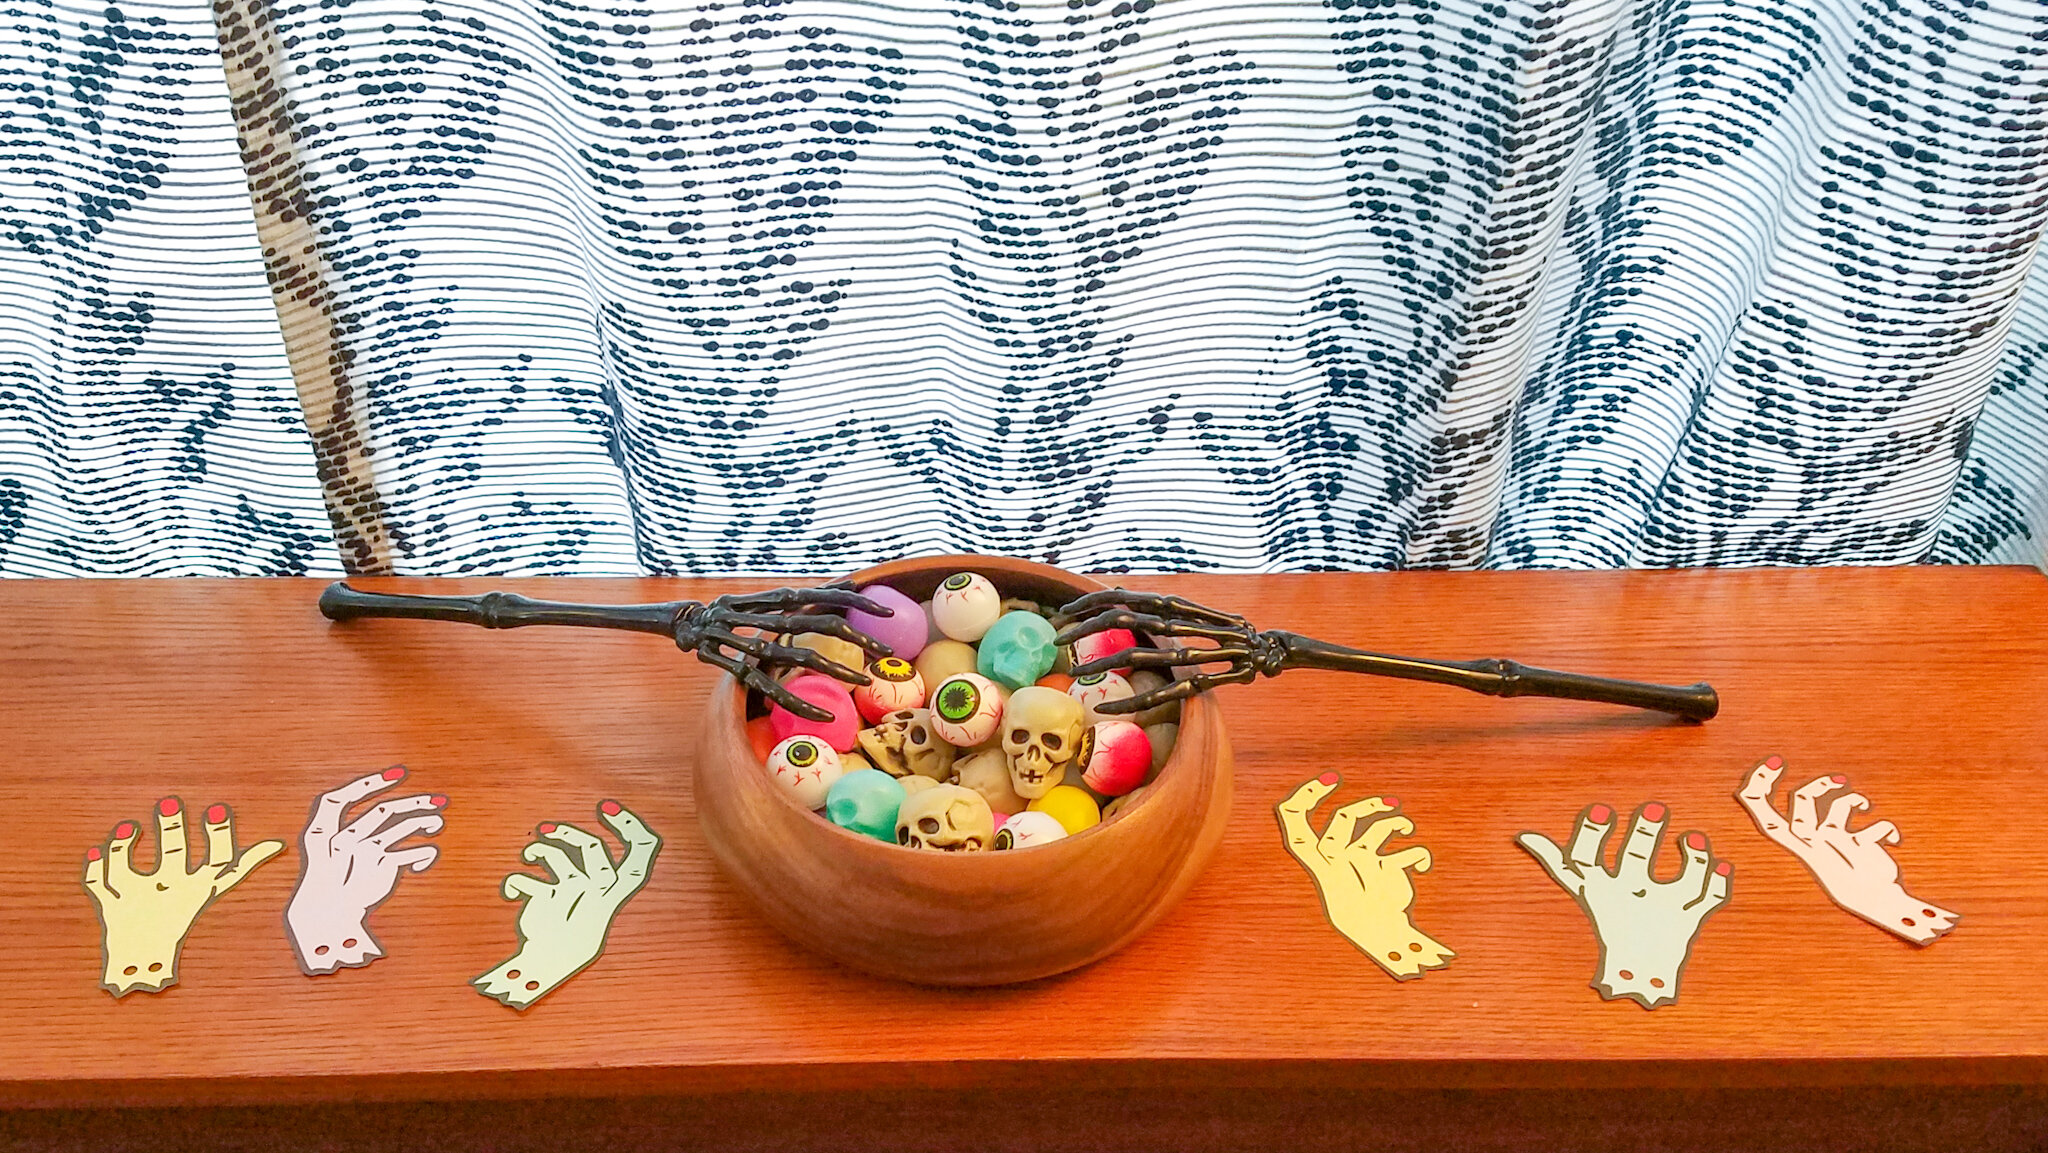 This vintage teak bowl is a favorite for seasonal sensory fun - nothing in this bowl is ever off-limits to the kids.